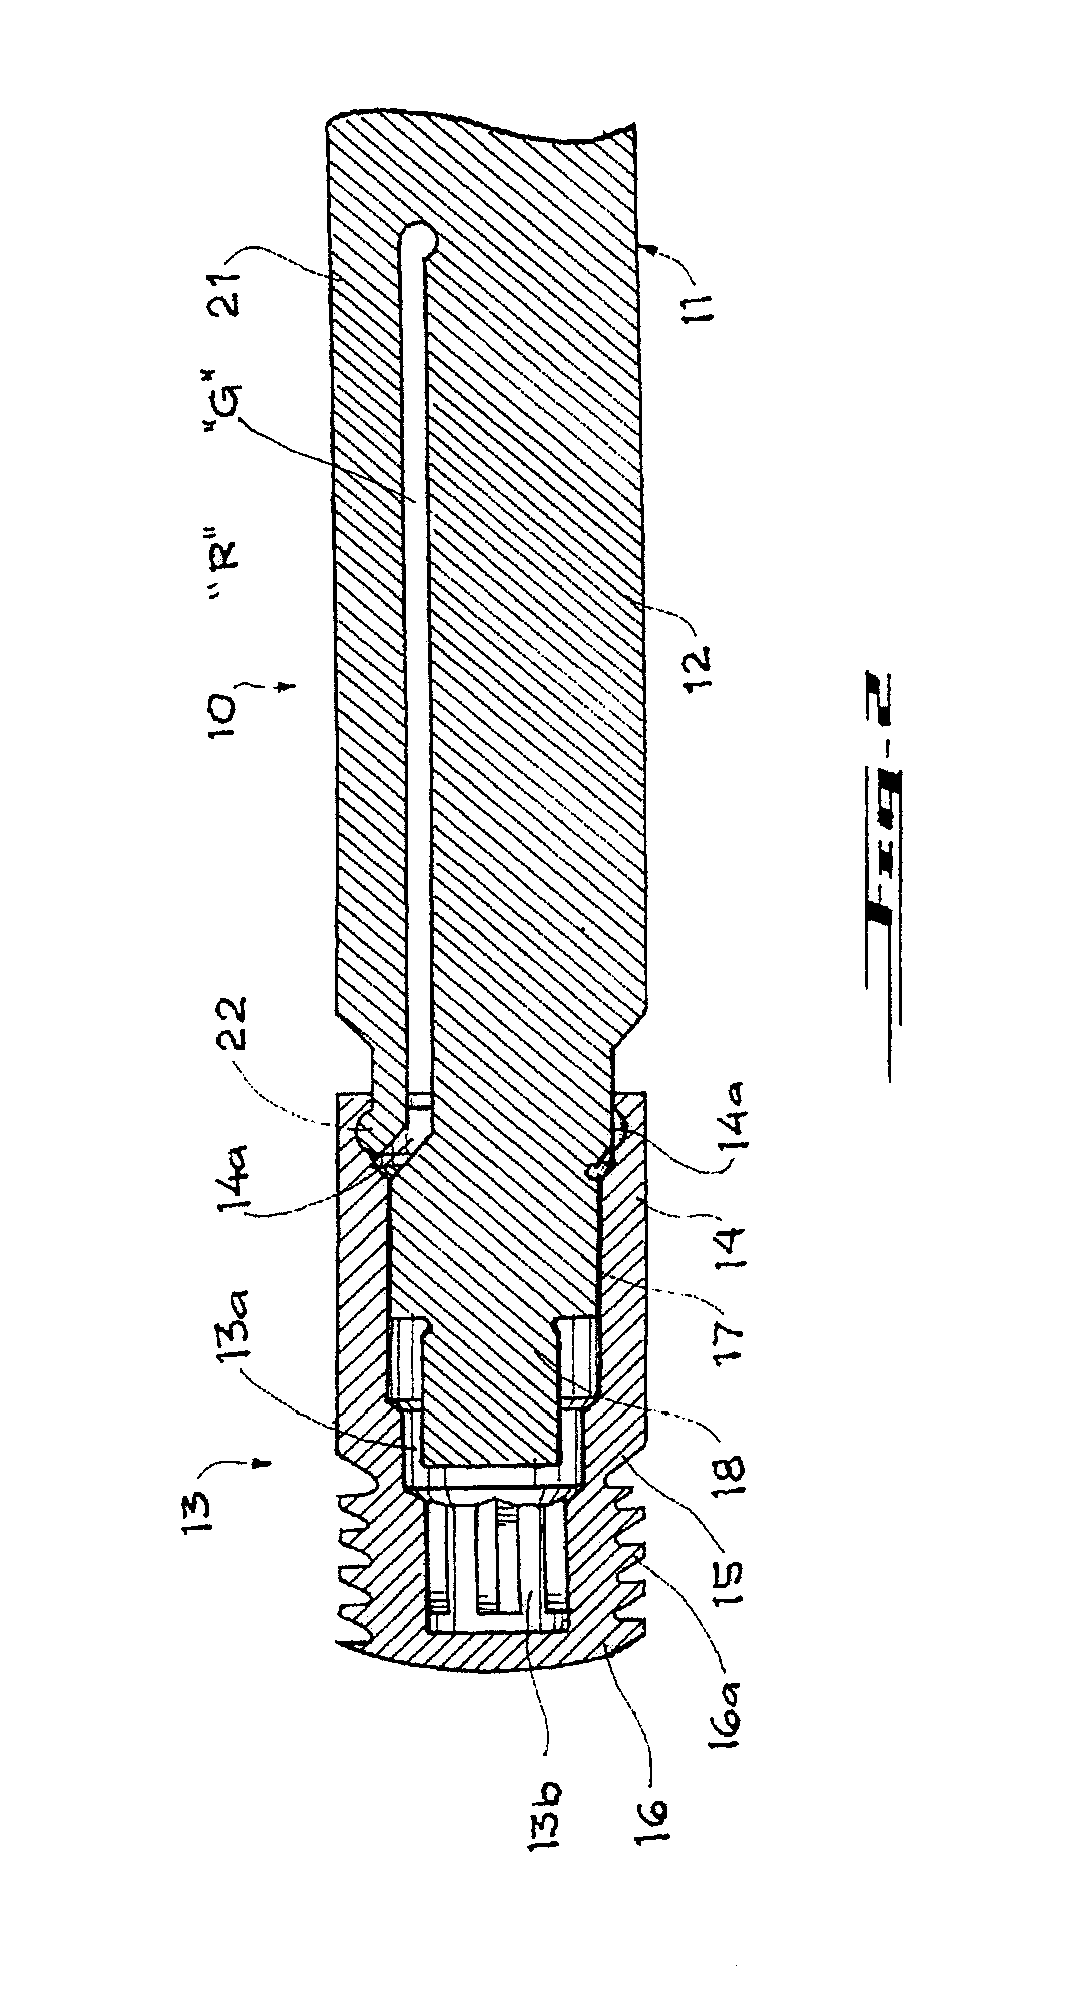 Tool and set screw for use in spinal implant systems